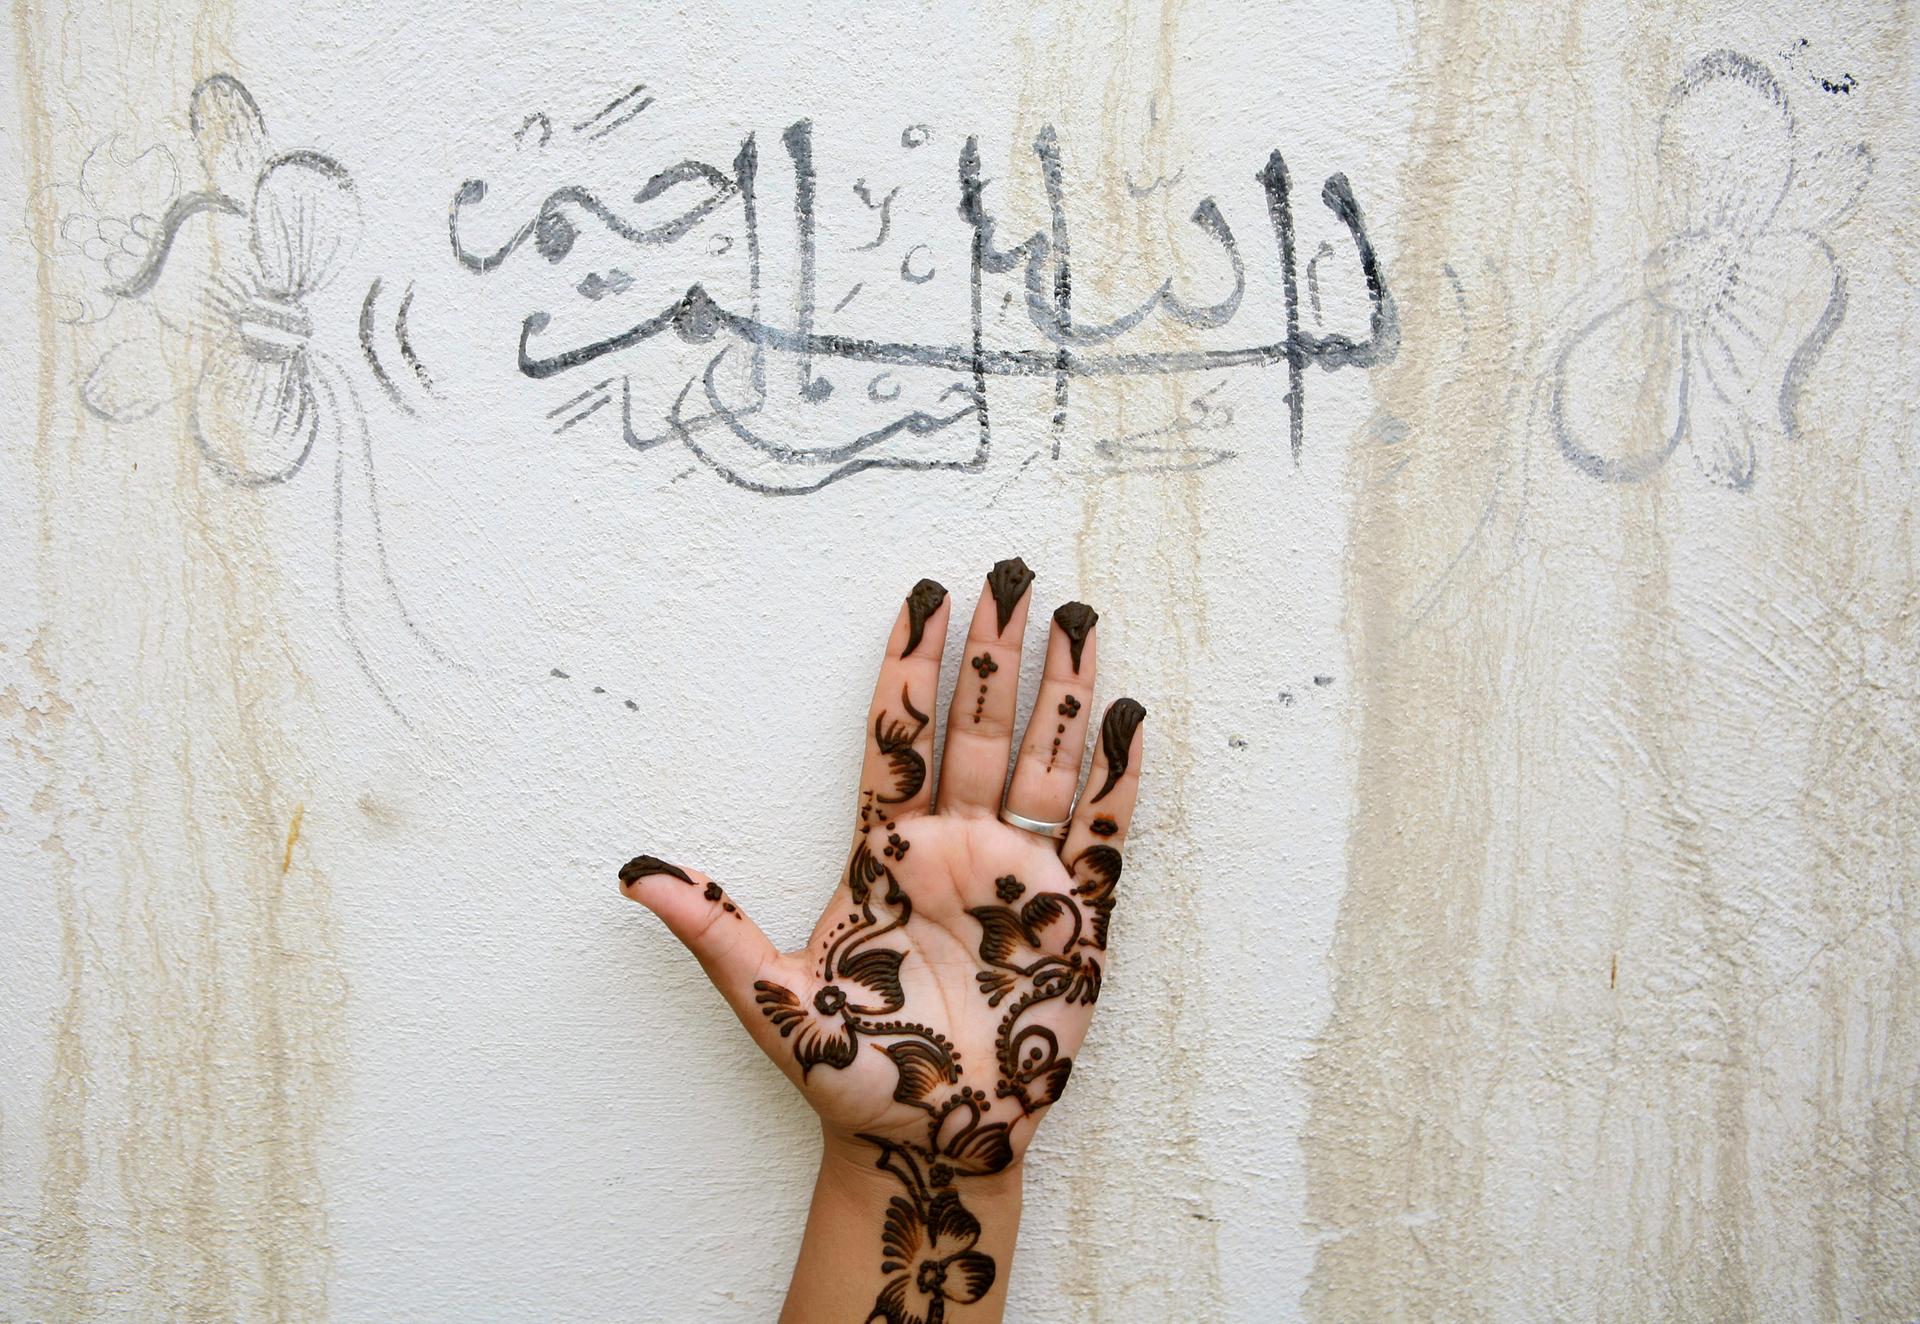 An Iranian woman holds up her hand, painted with henna, under a religious sentence as she prepares for a wedding ceremony in the city of Qeshm on Qeshm Island at the Persian Gulf, November 1, 2006. The sentence reads, "In the name of Allah, the Beneficent